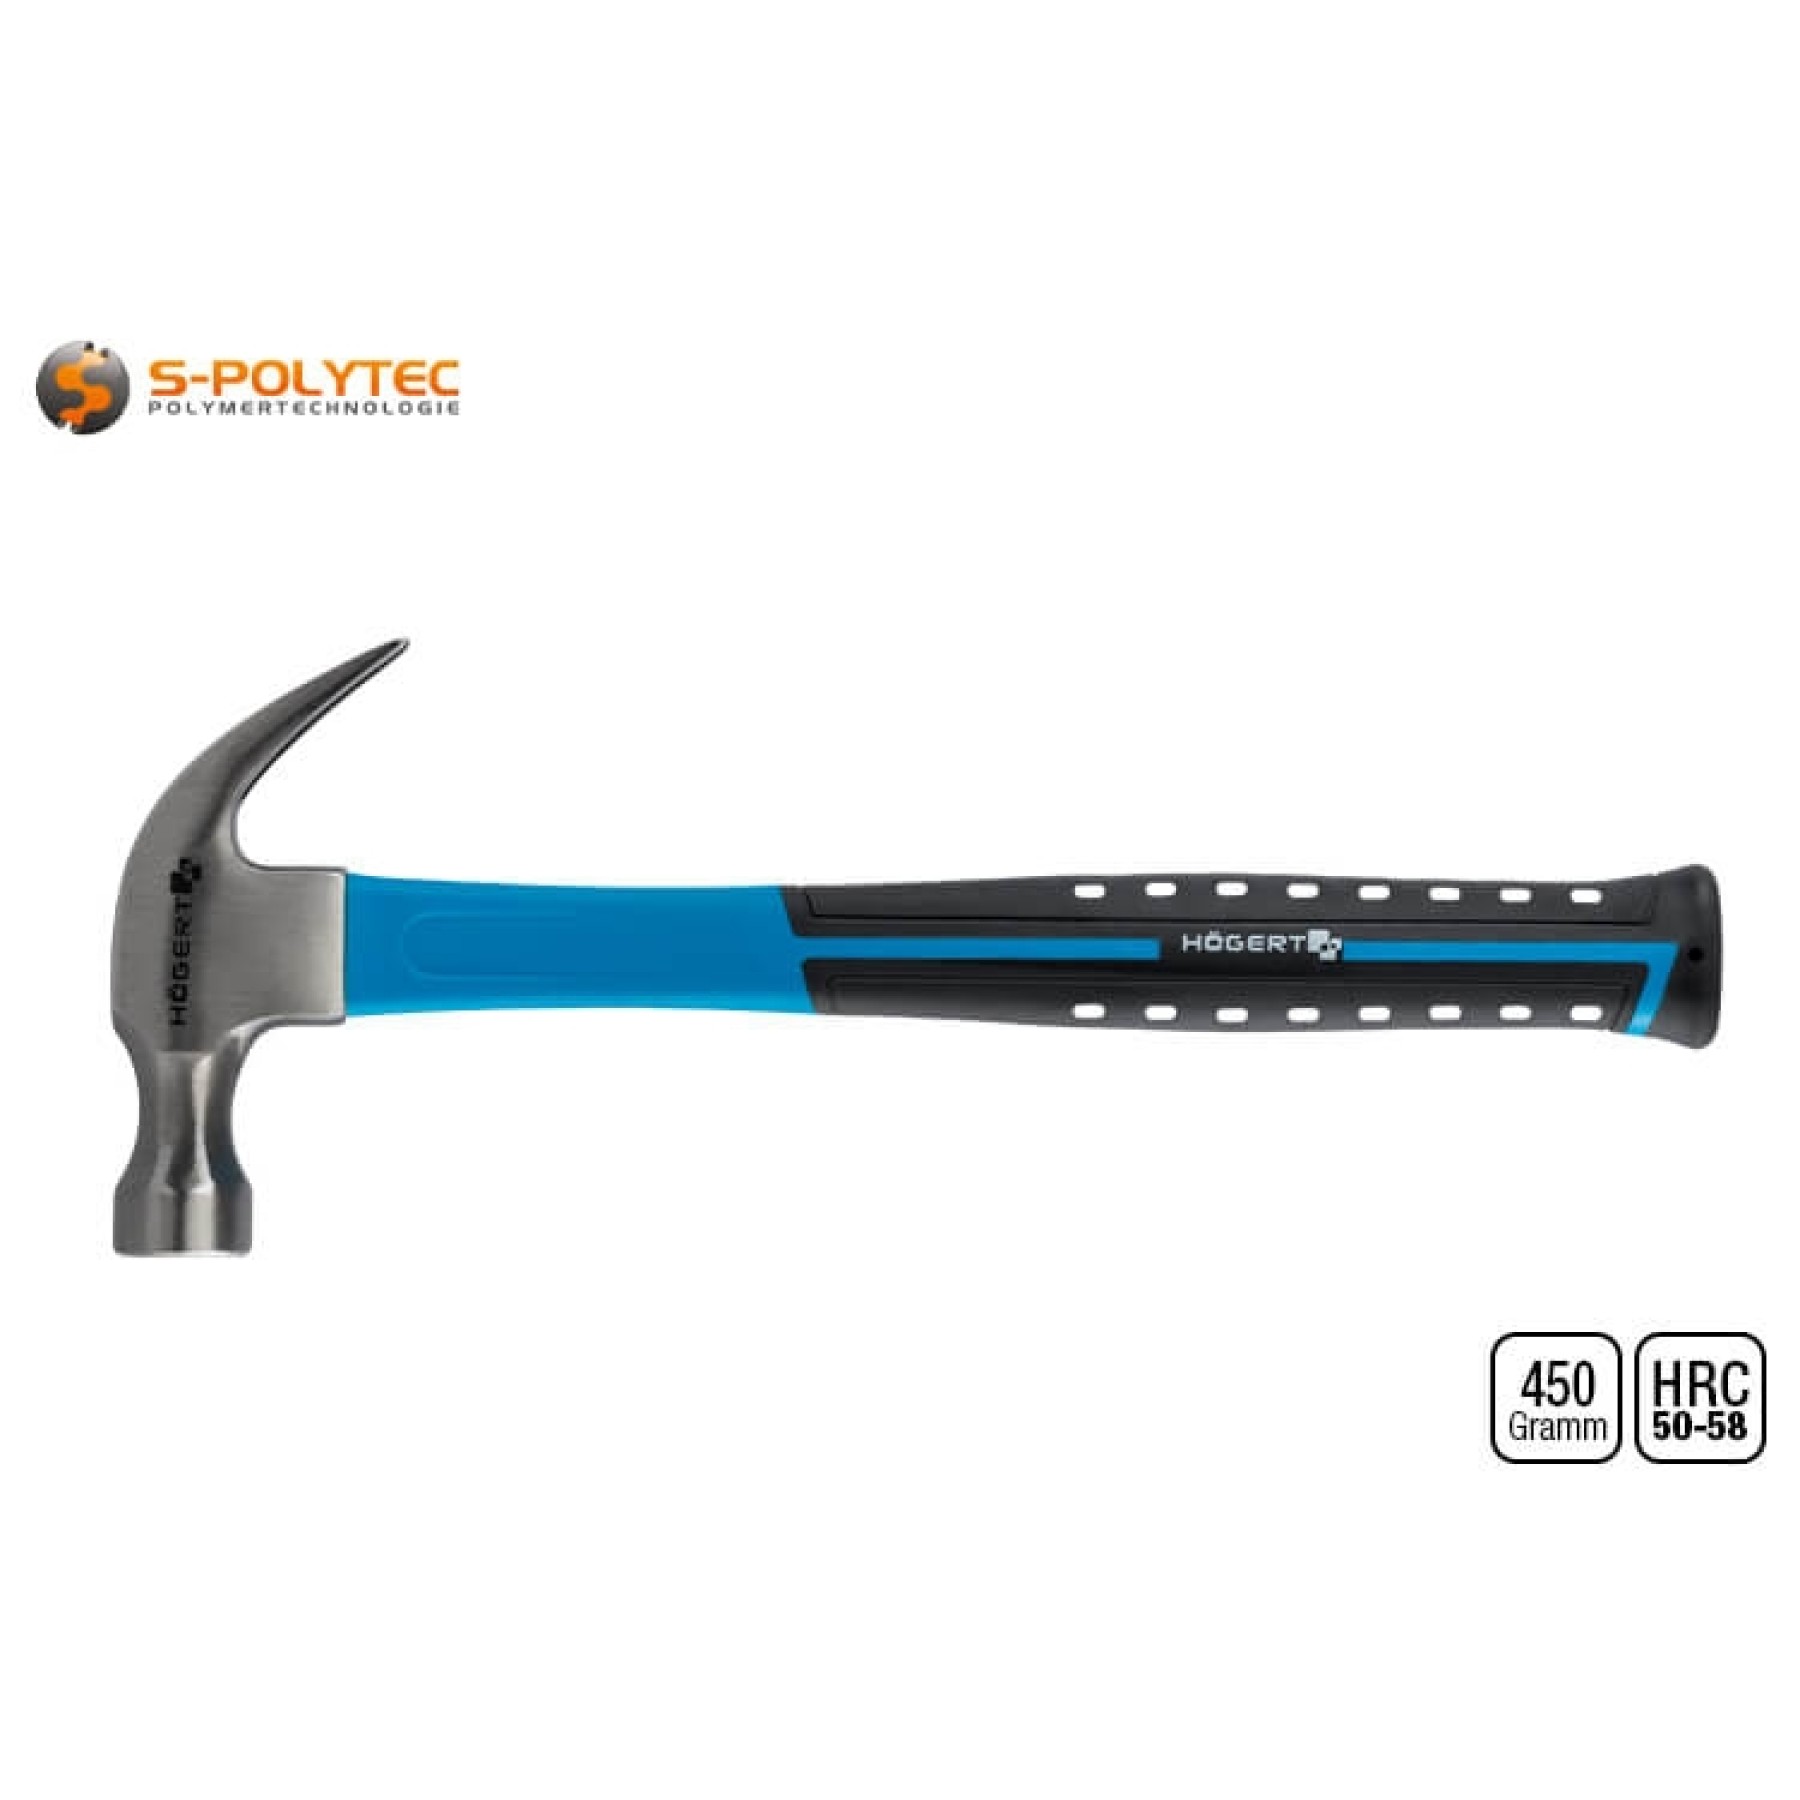 The ergonomic handle with non-slip grip is optimised for the head shape and weight